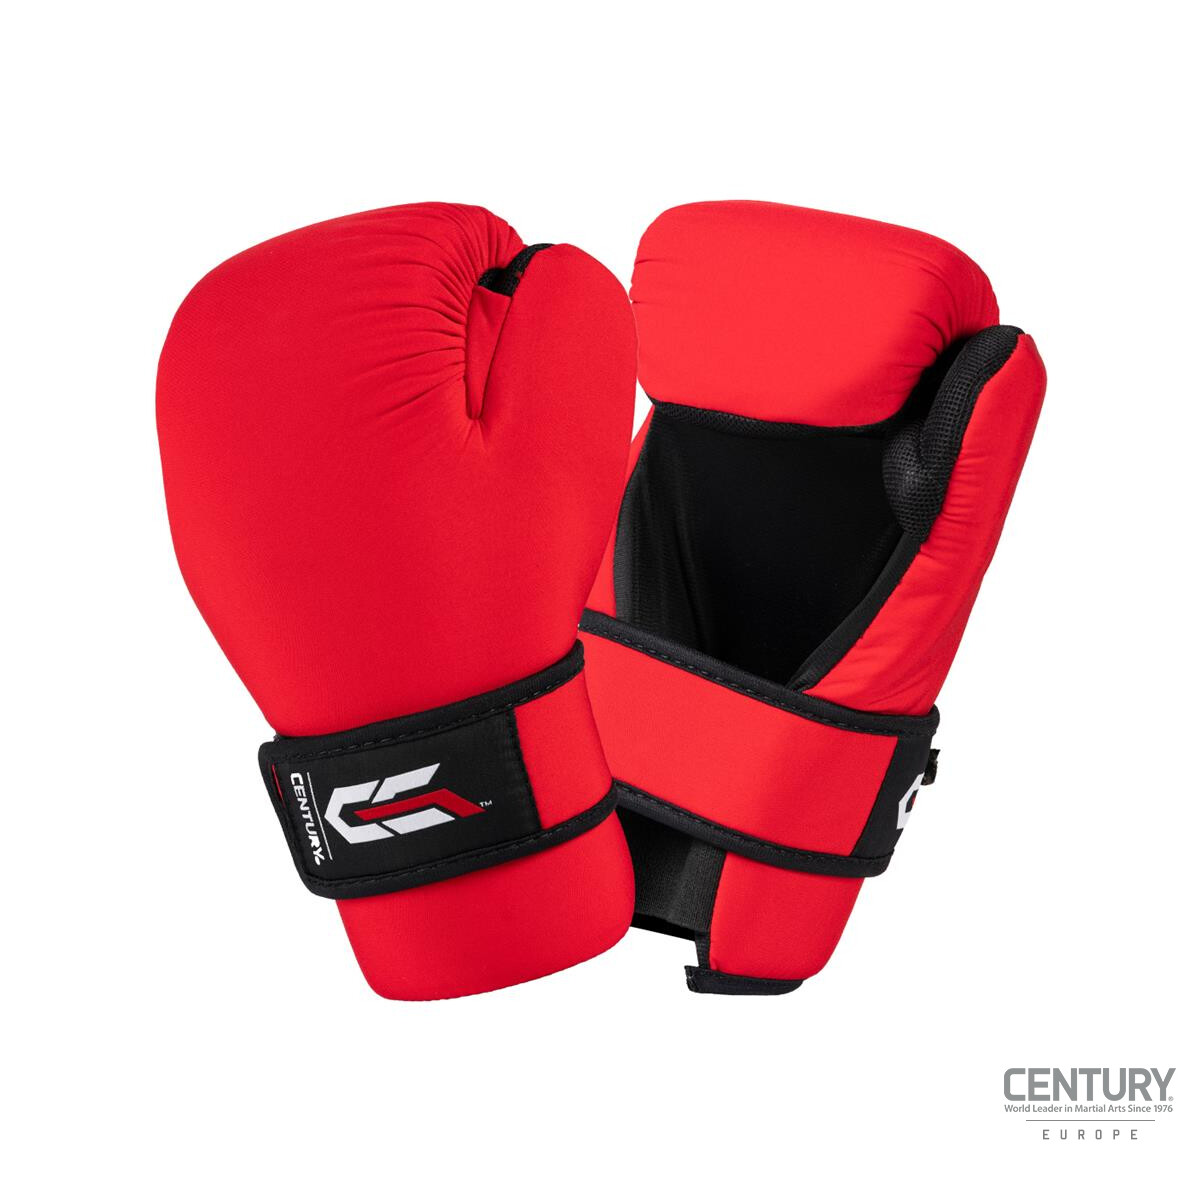 Blue Century Student MMA Sparring Gloves 